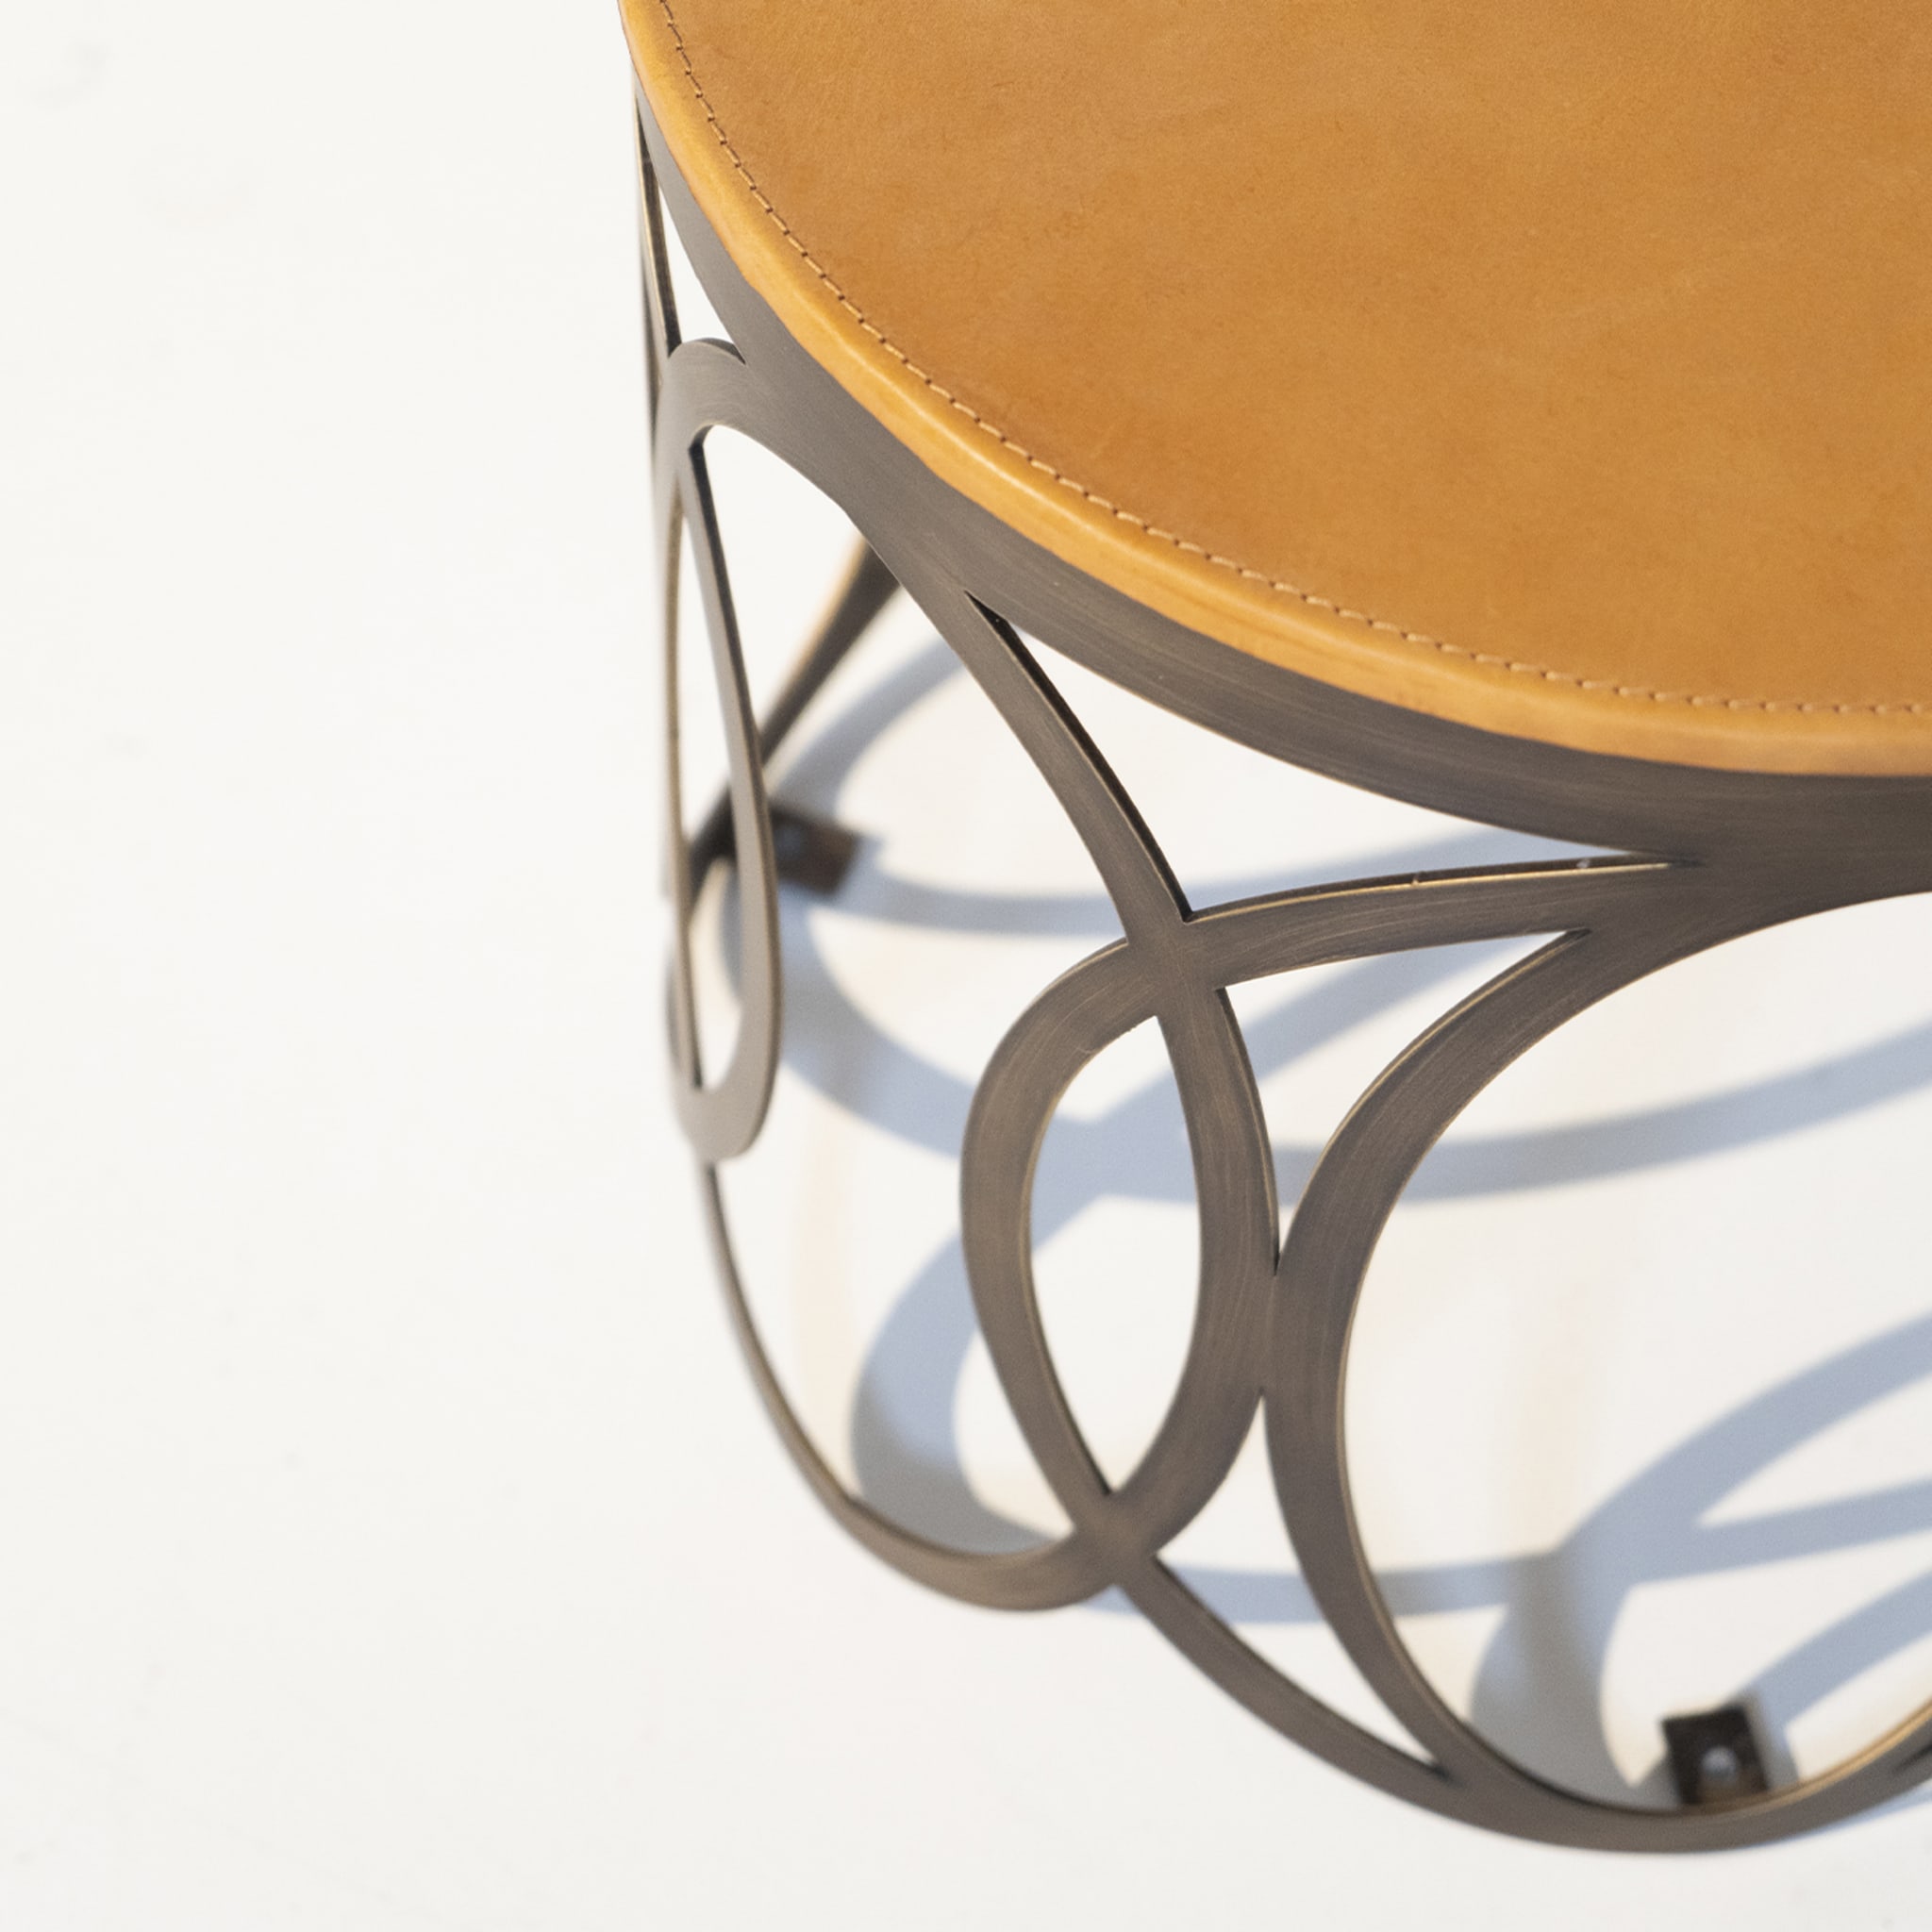 Valzer Table Tribeca Collection by Marco and Giulio Mantellassi - Alternative view 1